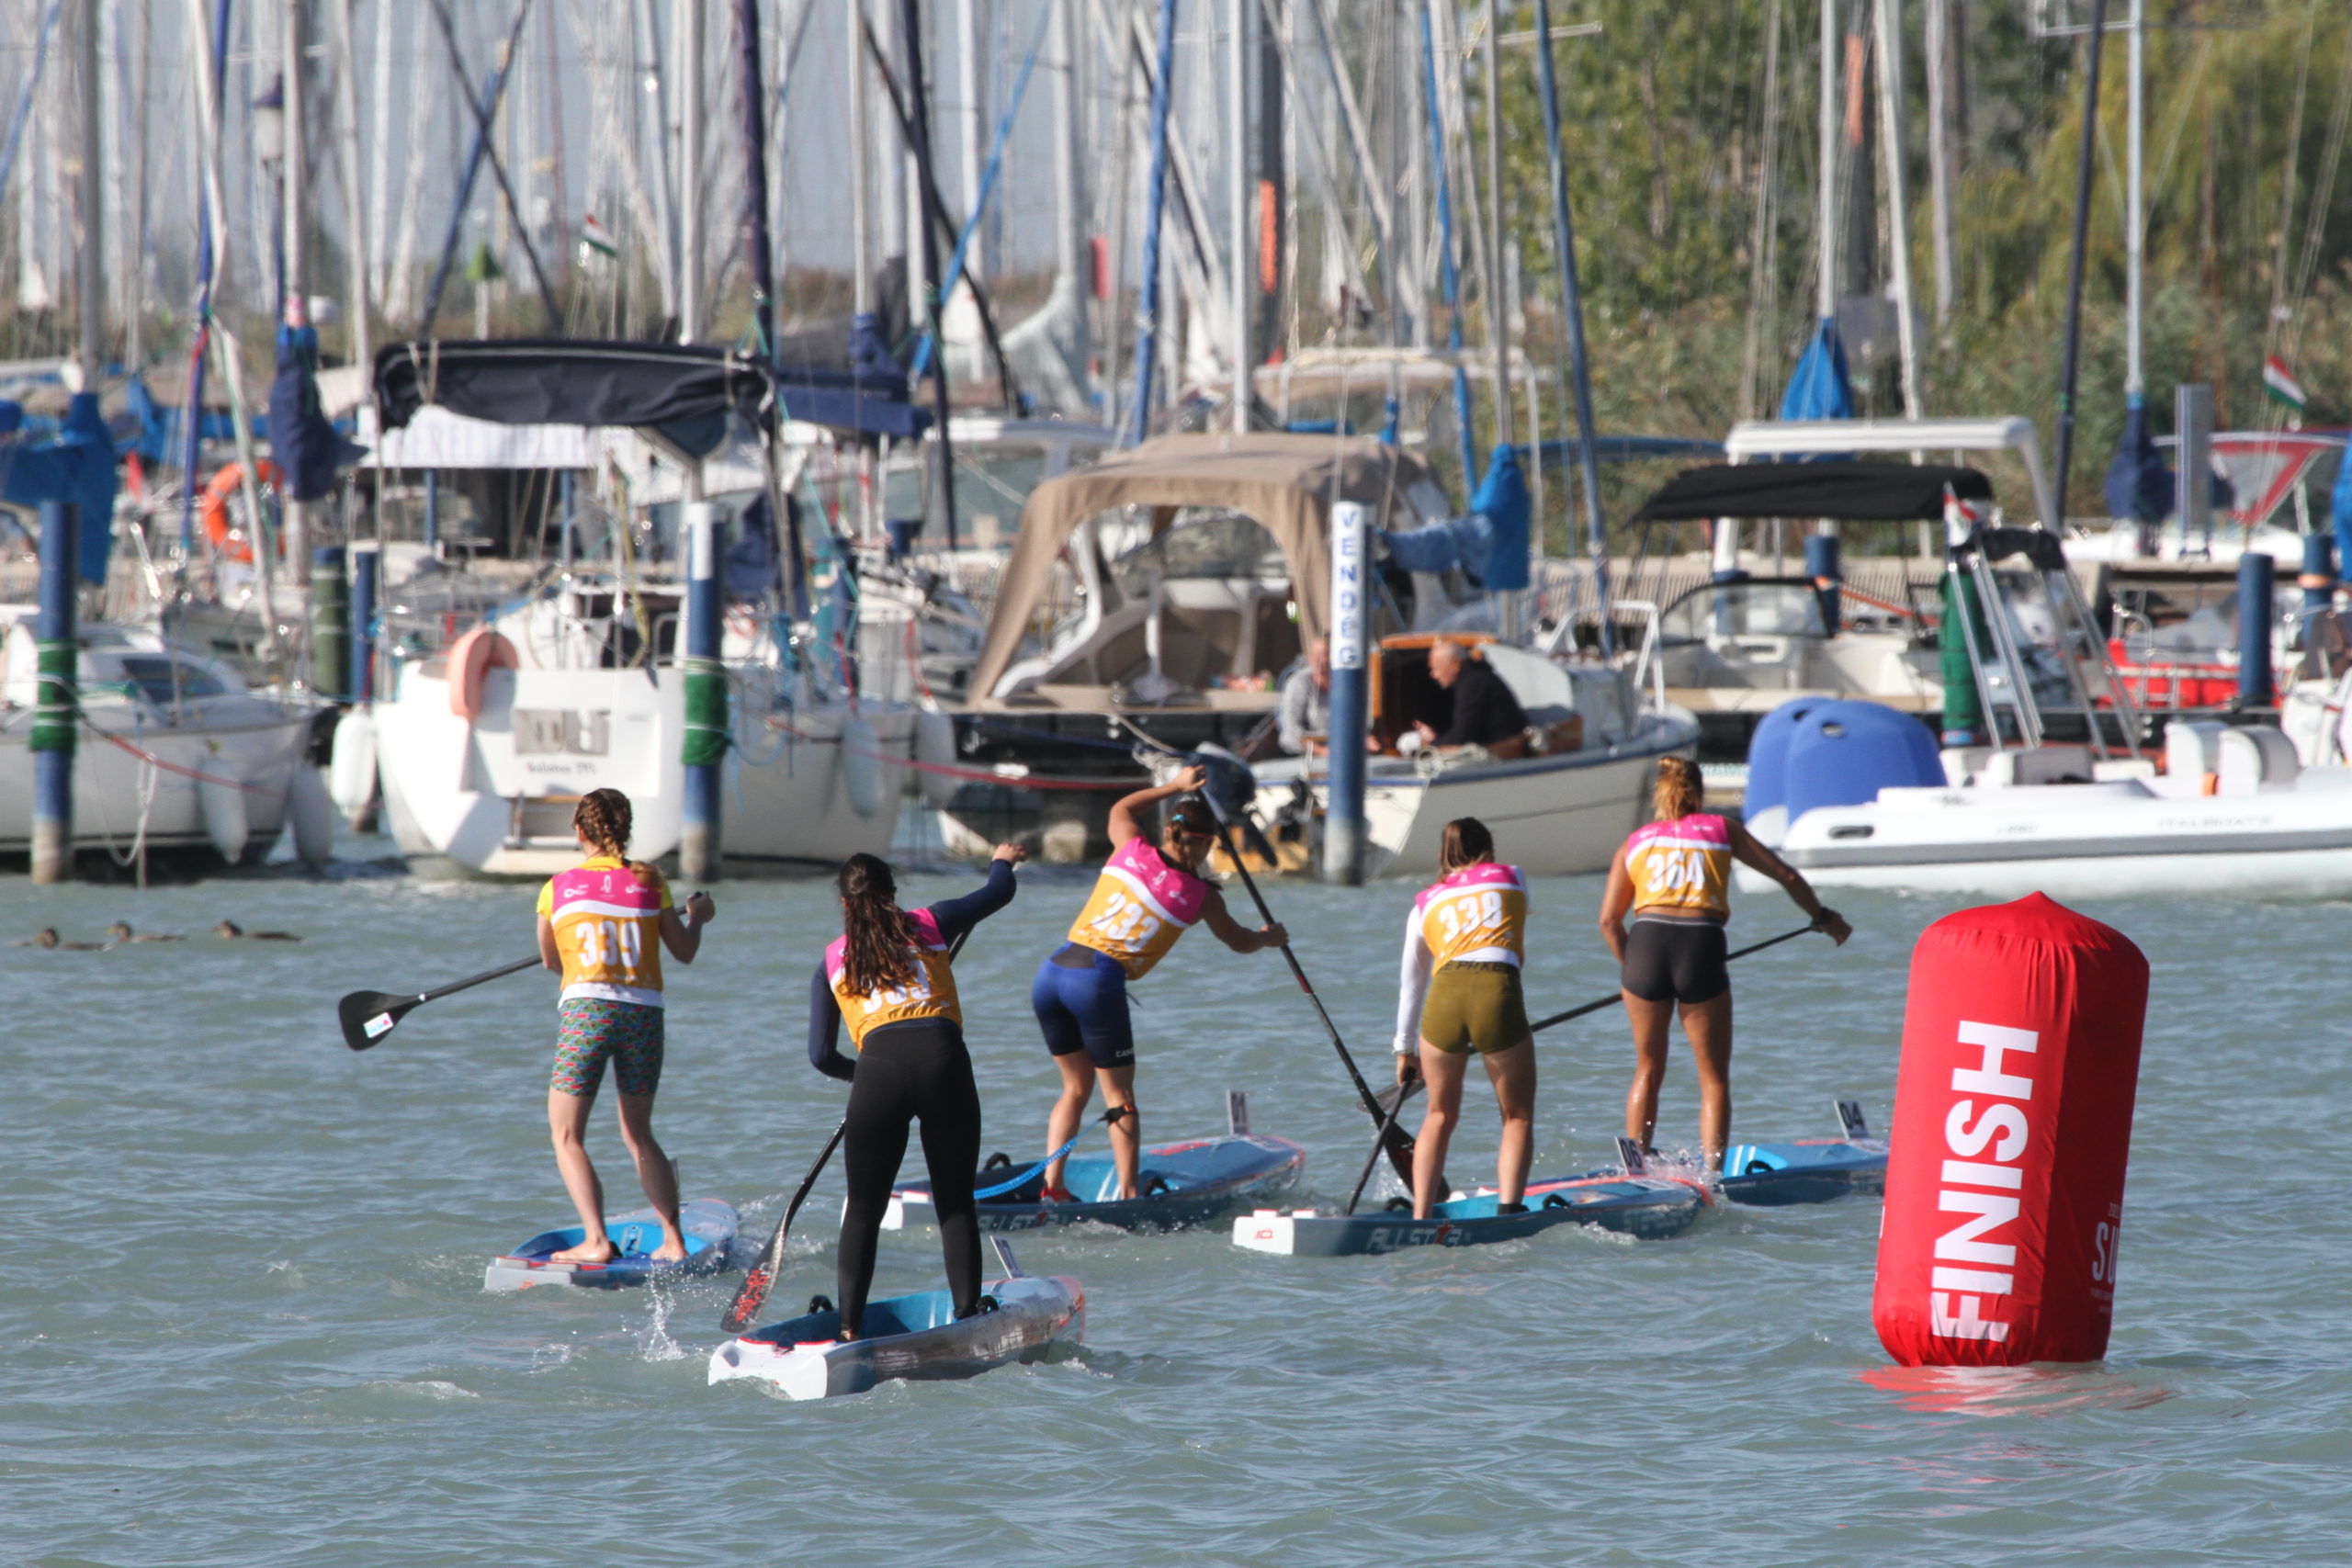 ICF World SUP Championships DAY 1 SETS A FIERY PACE!